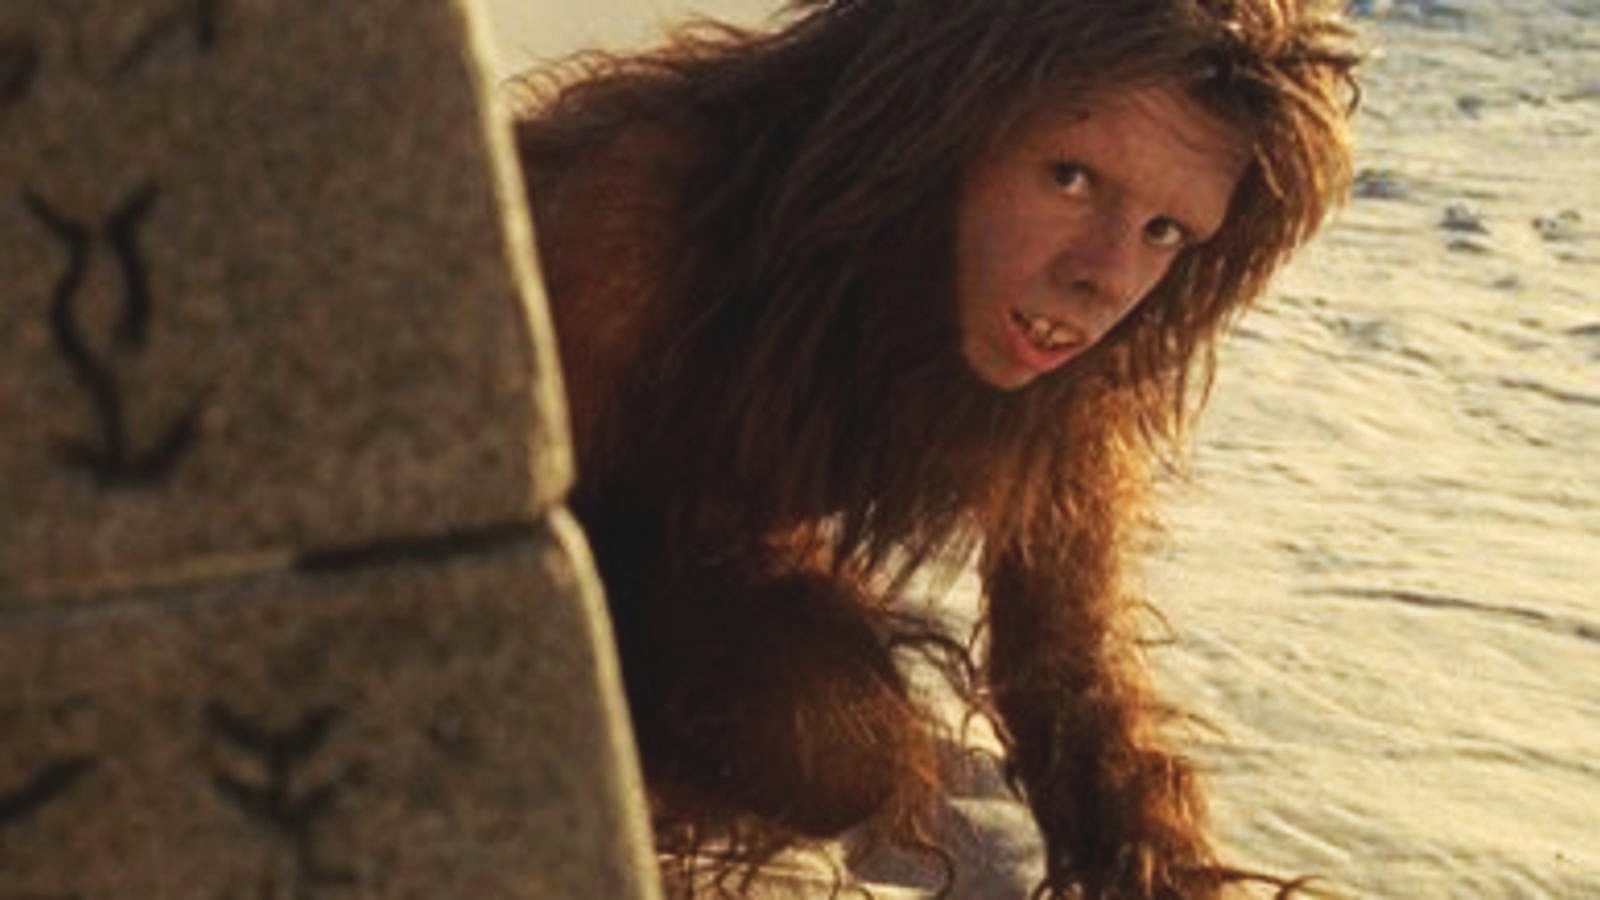  A production still from   Land of the Lost   with  Jorma Taccone , in full costume as “Chaka”  